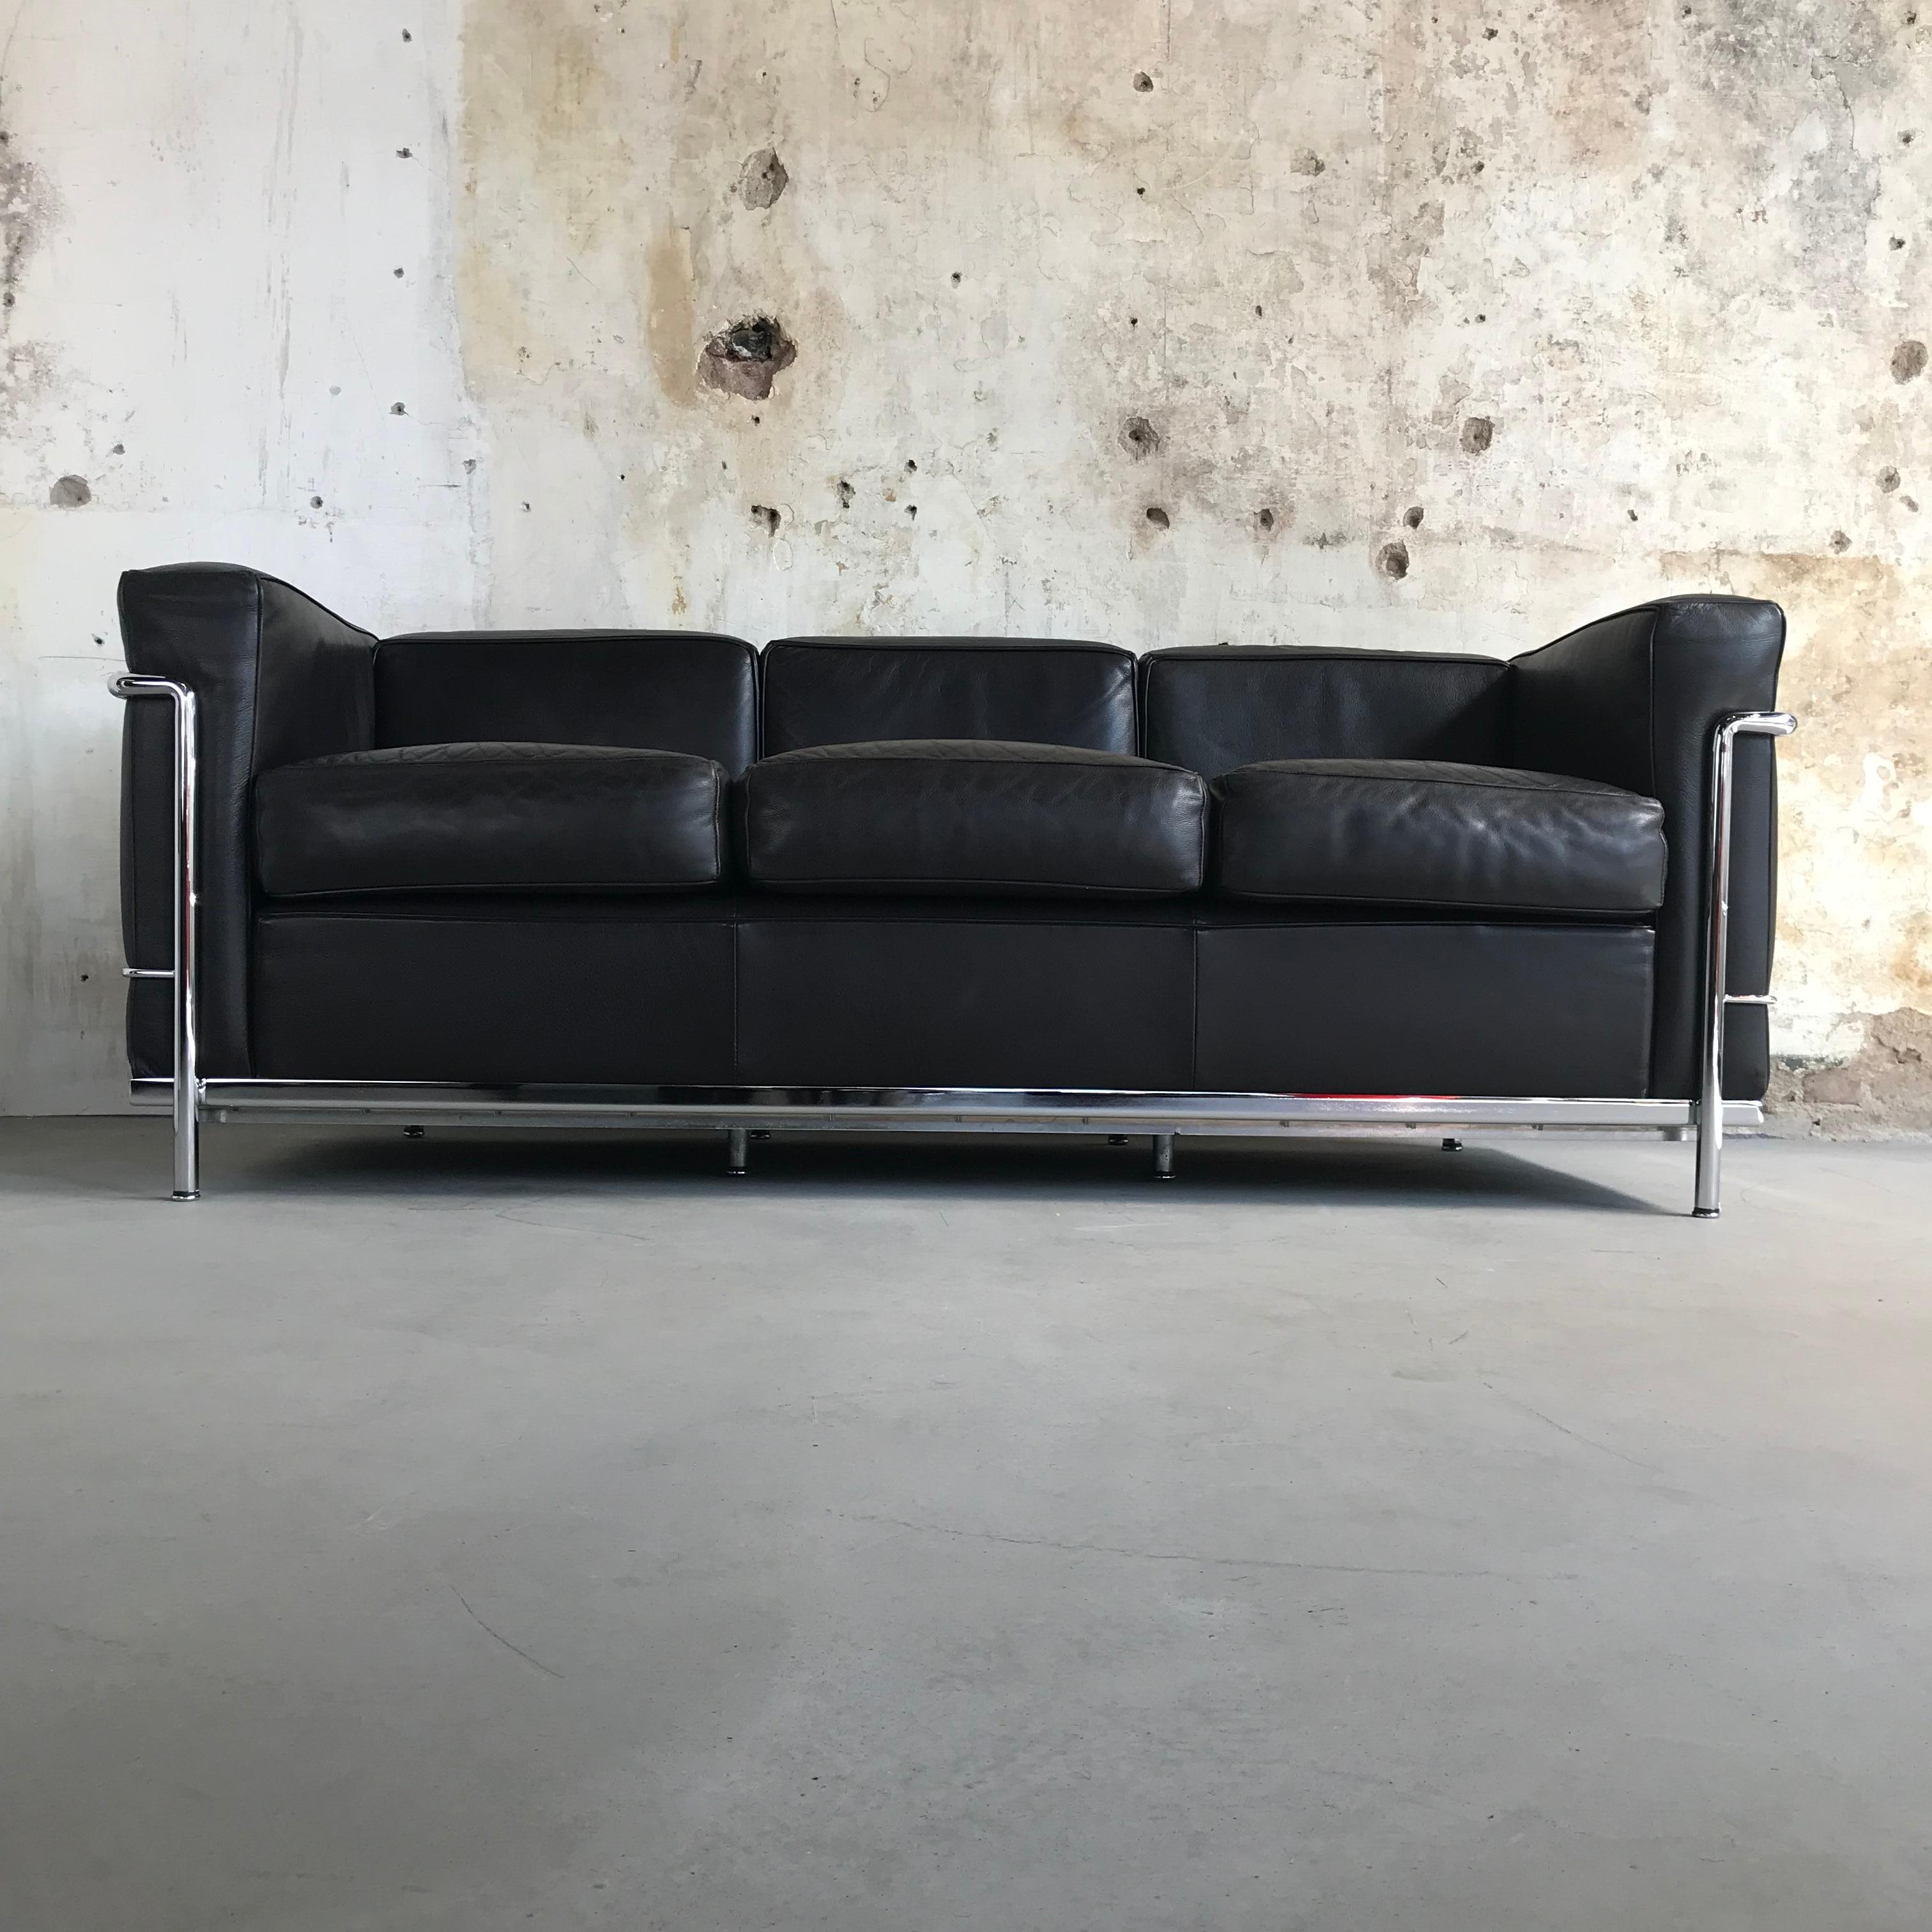 Very beautiful, original Cassina LC2 three-seat sofa in very nice dark brown leather (rare color!). The sofa is produced in 1998 and always well maintained. The chrome is like new and the leather has now (thankfully!) a lovely patina. Of course, the